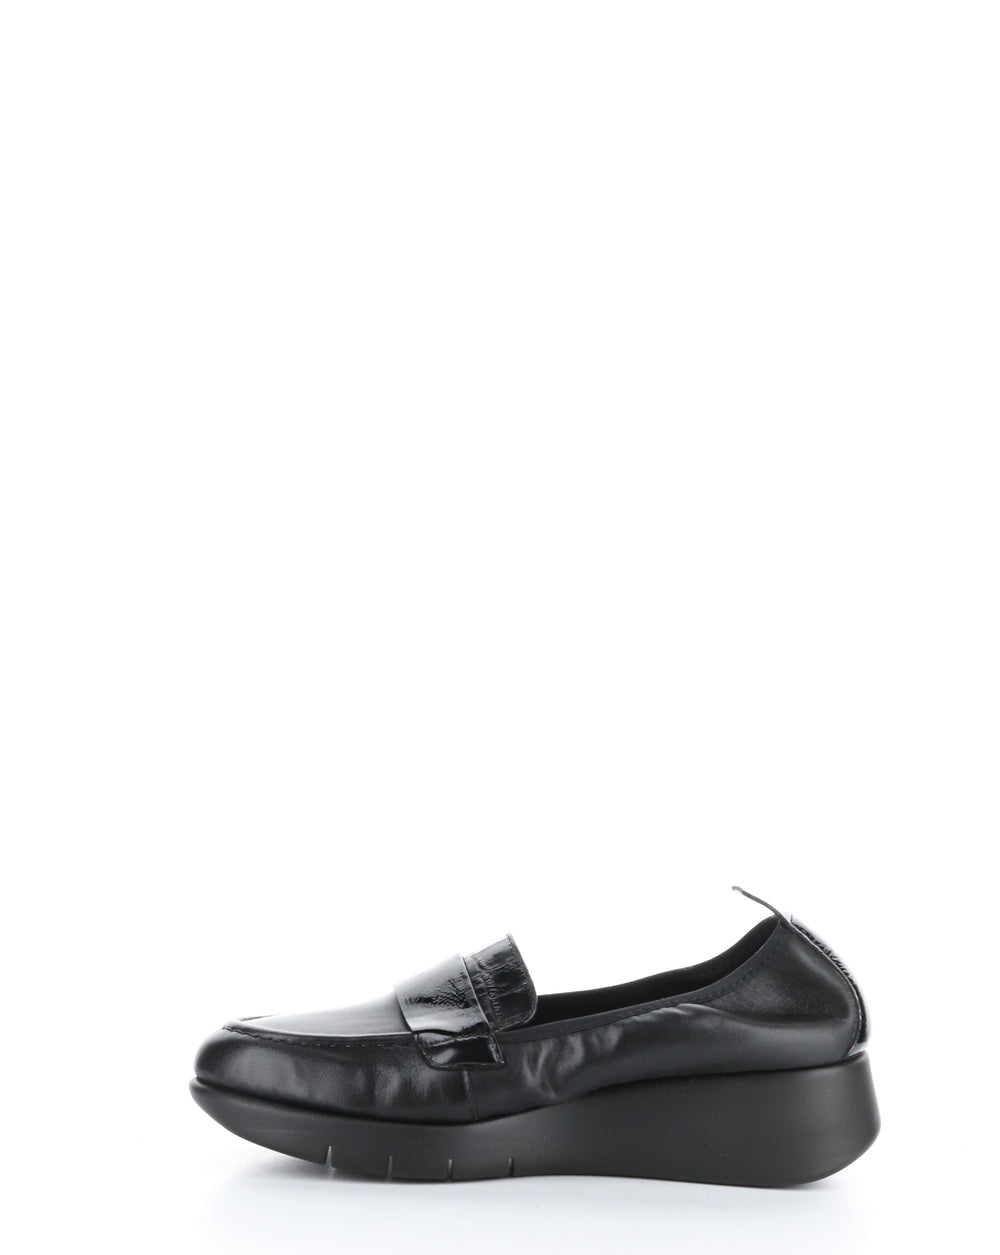 SCREEN MIXED BLACK Round Toe Shoes